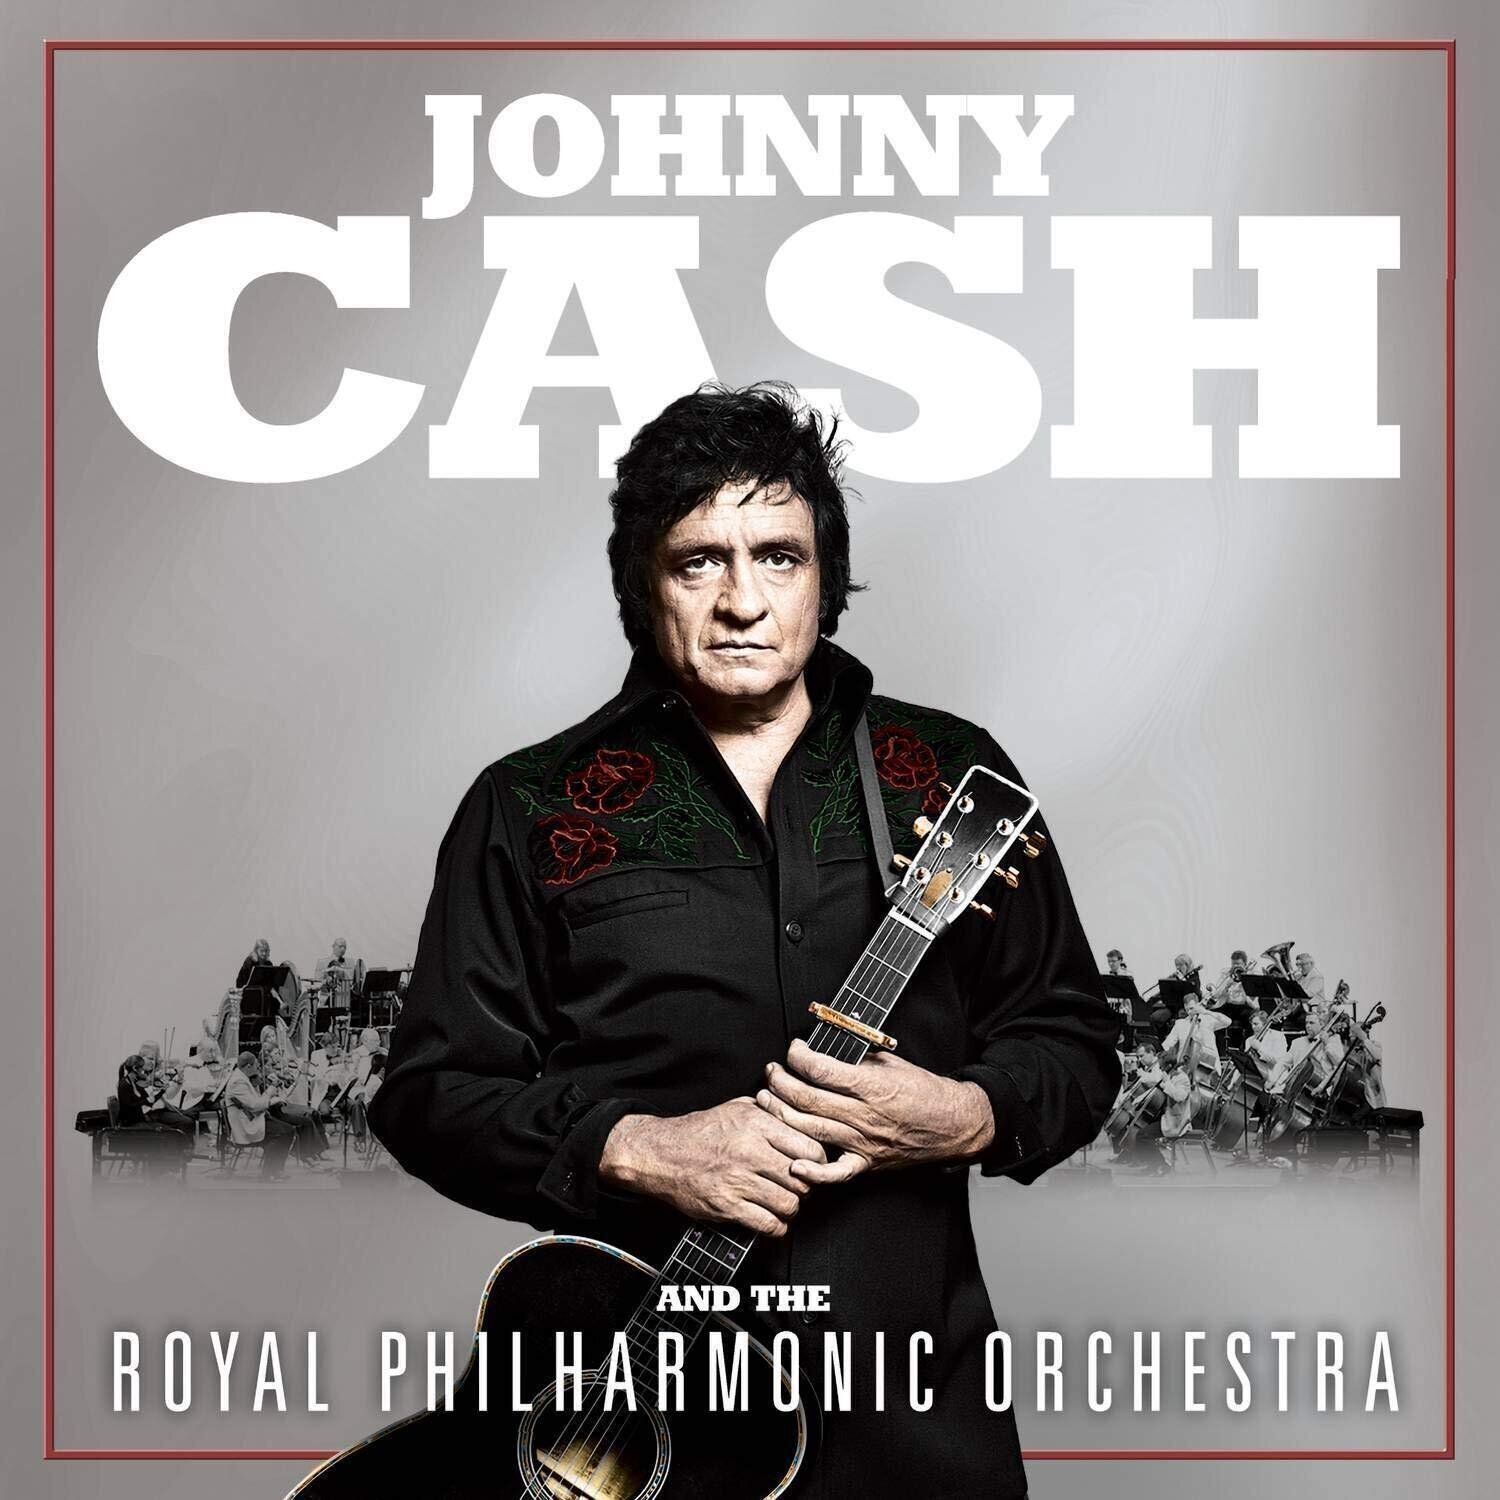 Disco in vinile Johnny Cash - Johnny Cash And The Royal Philharmonic Orchestra (LP)